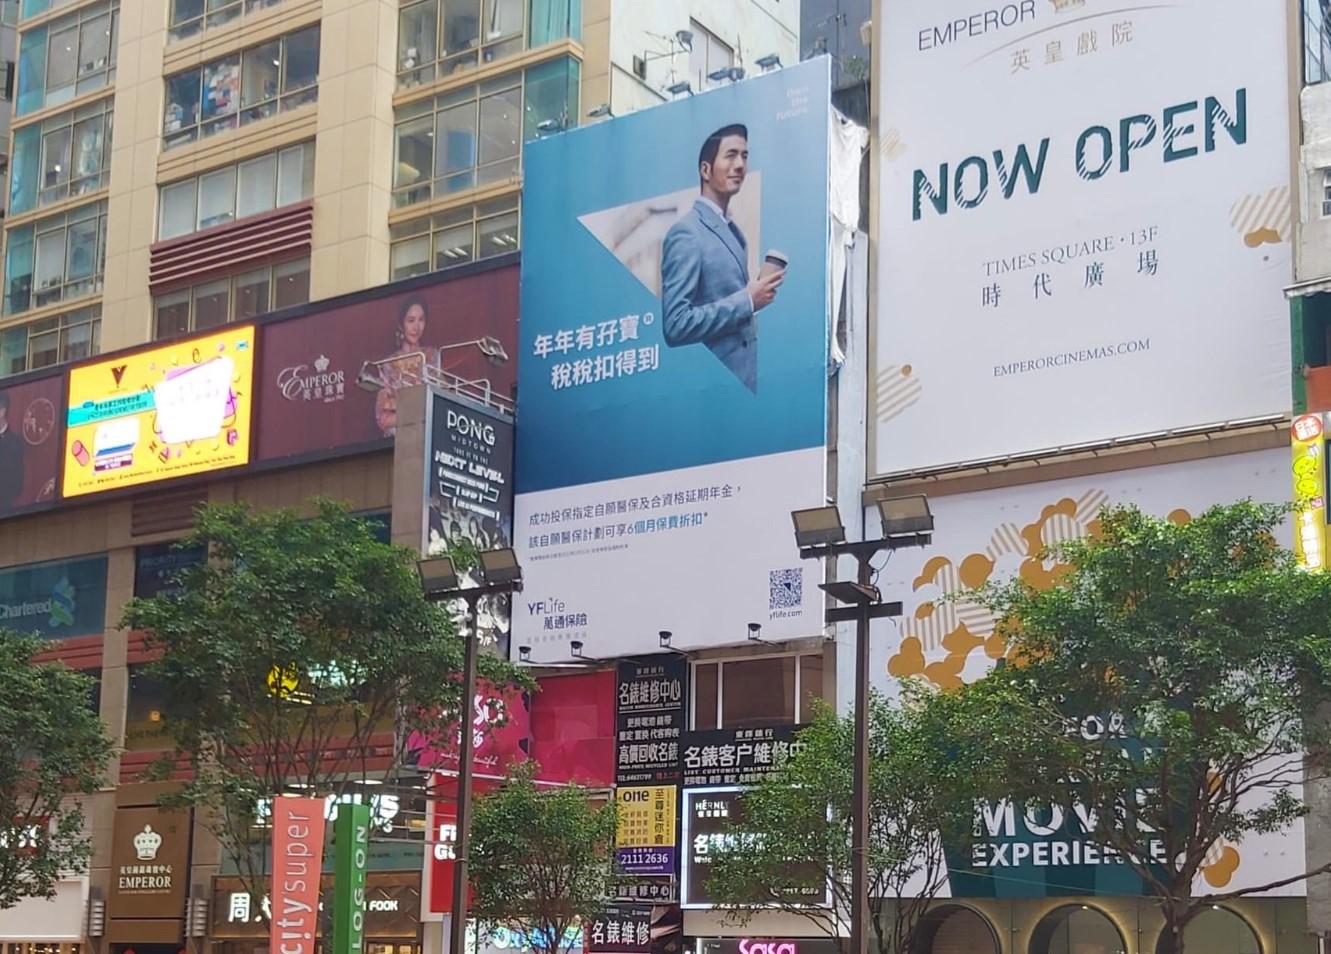 The new YF Life advertising campaign on outdoor billboard exudes the brand’s positive spirit.